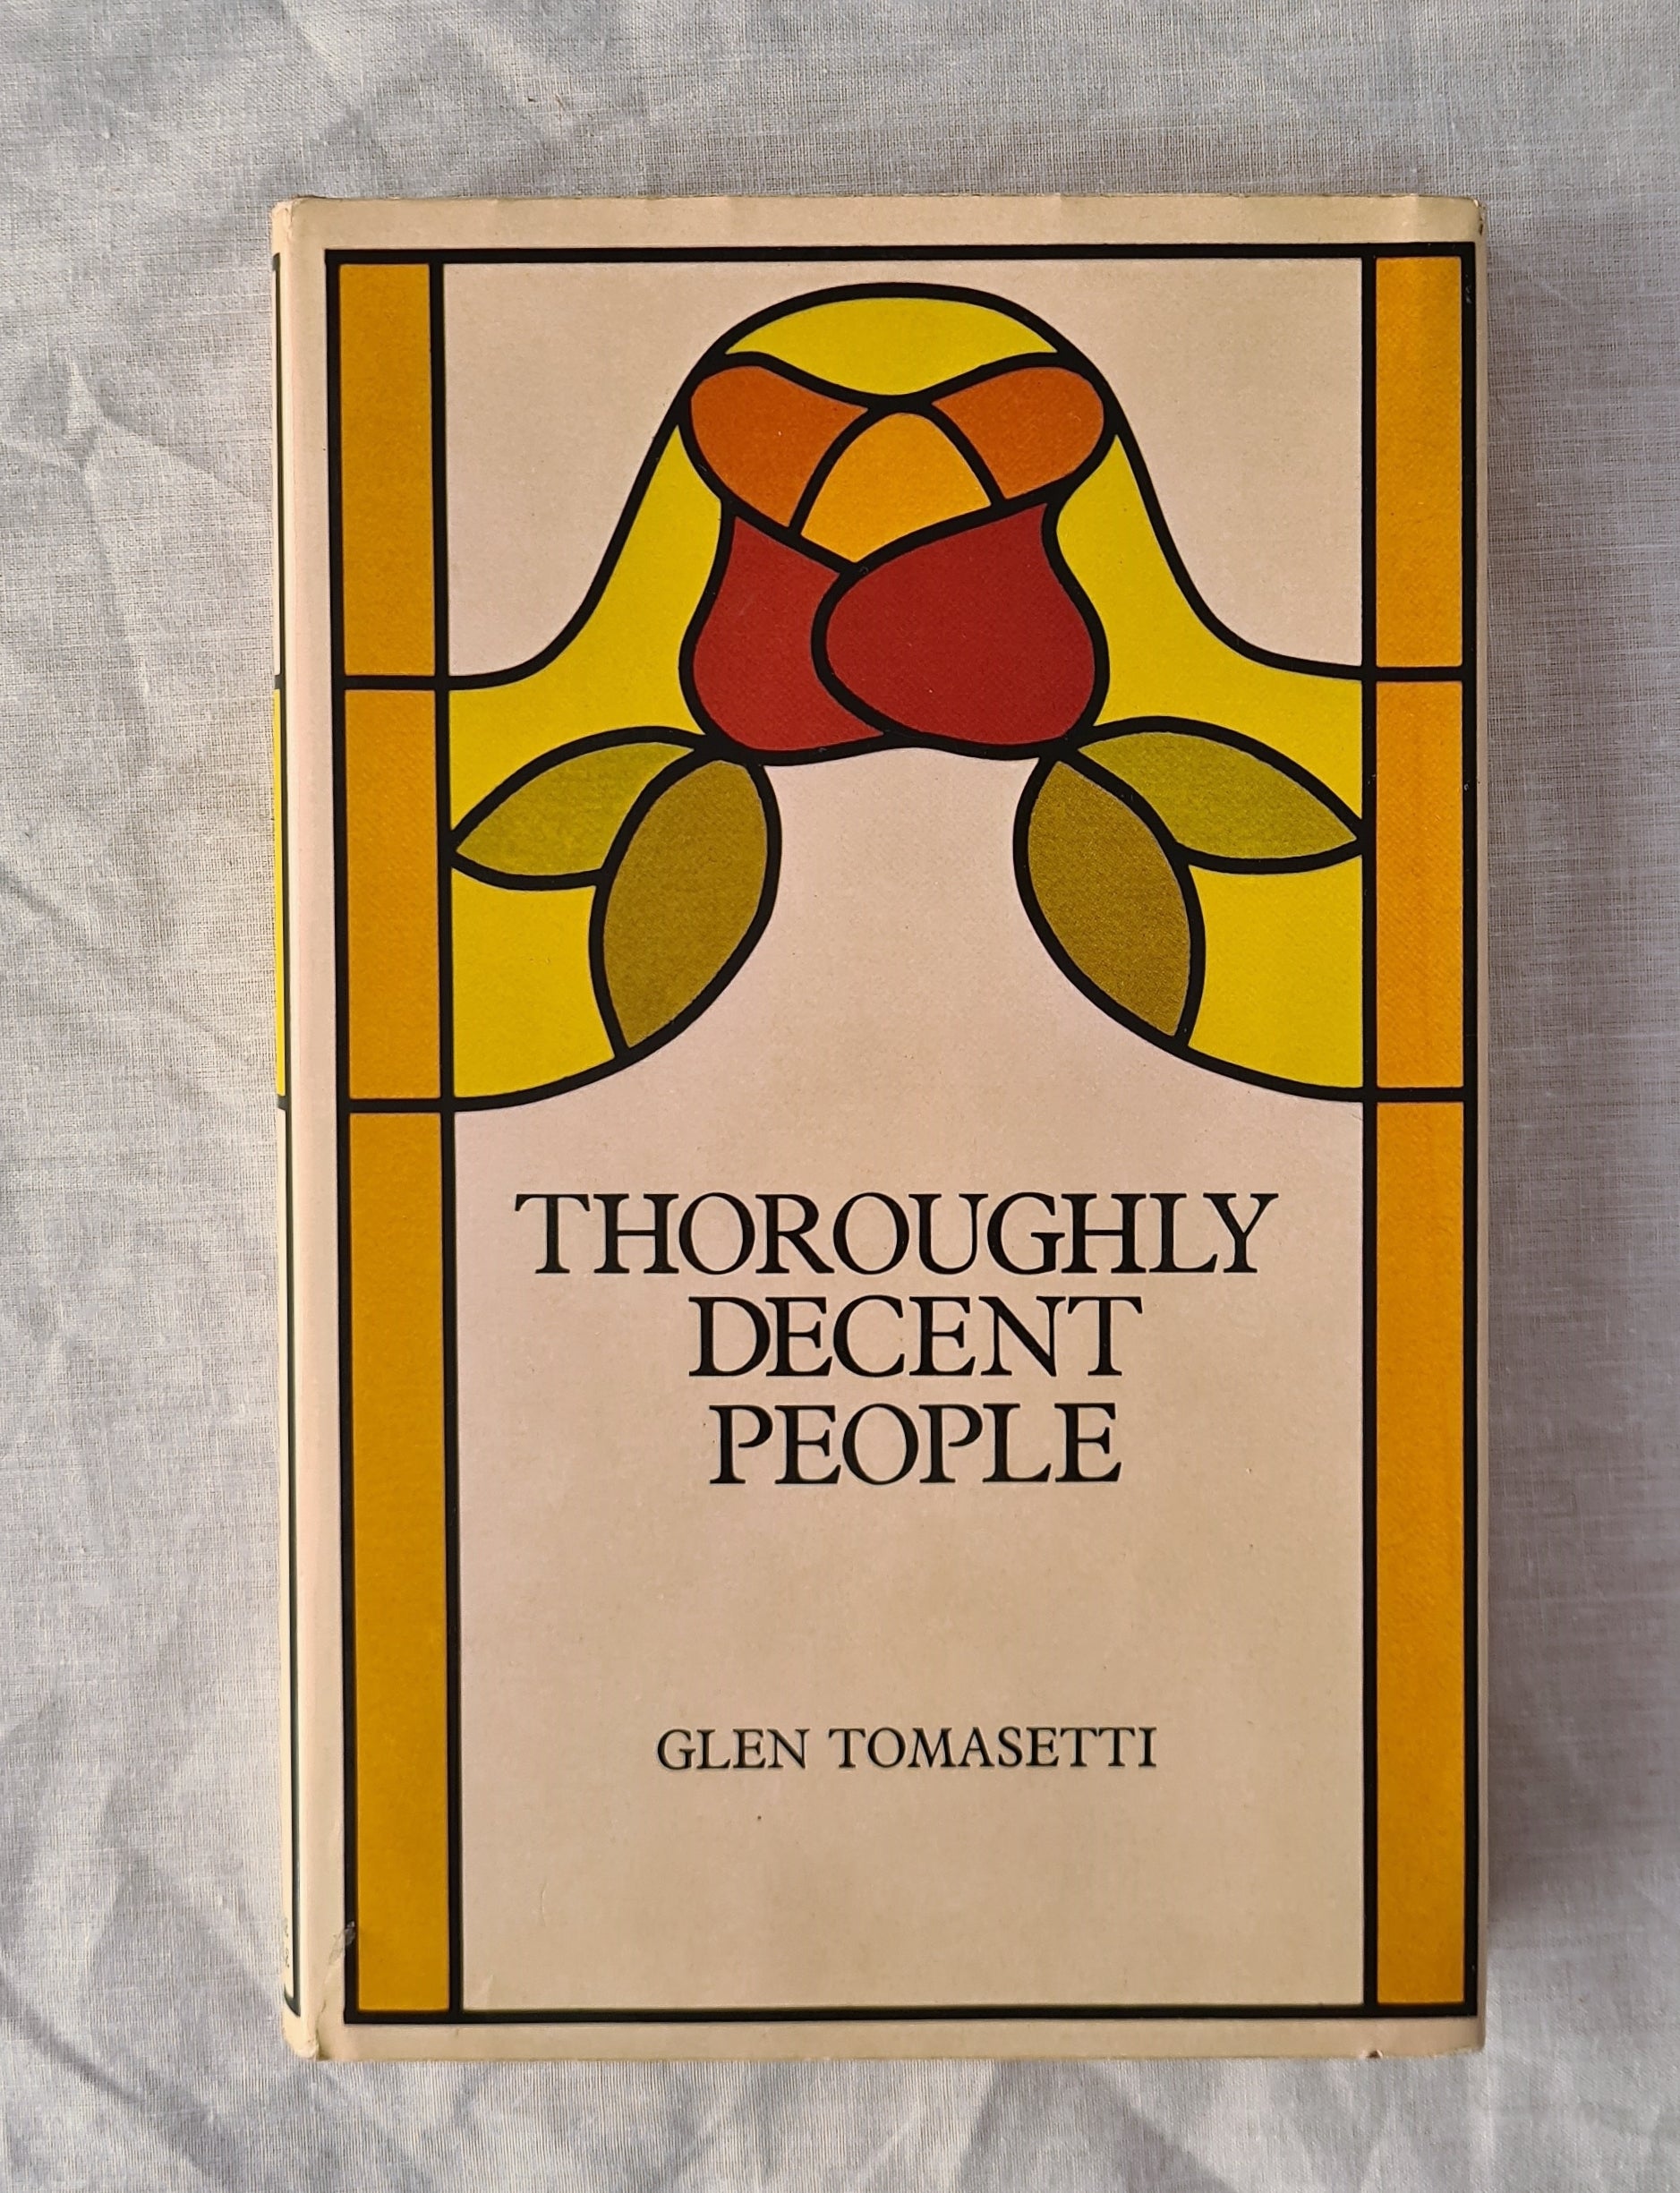 Thoroughly Decent People  A Folktale  by Glen Tomasetti